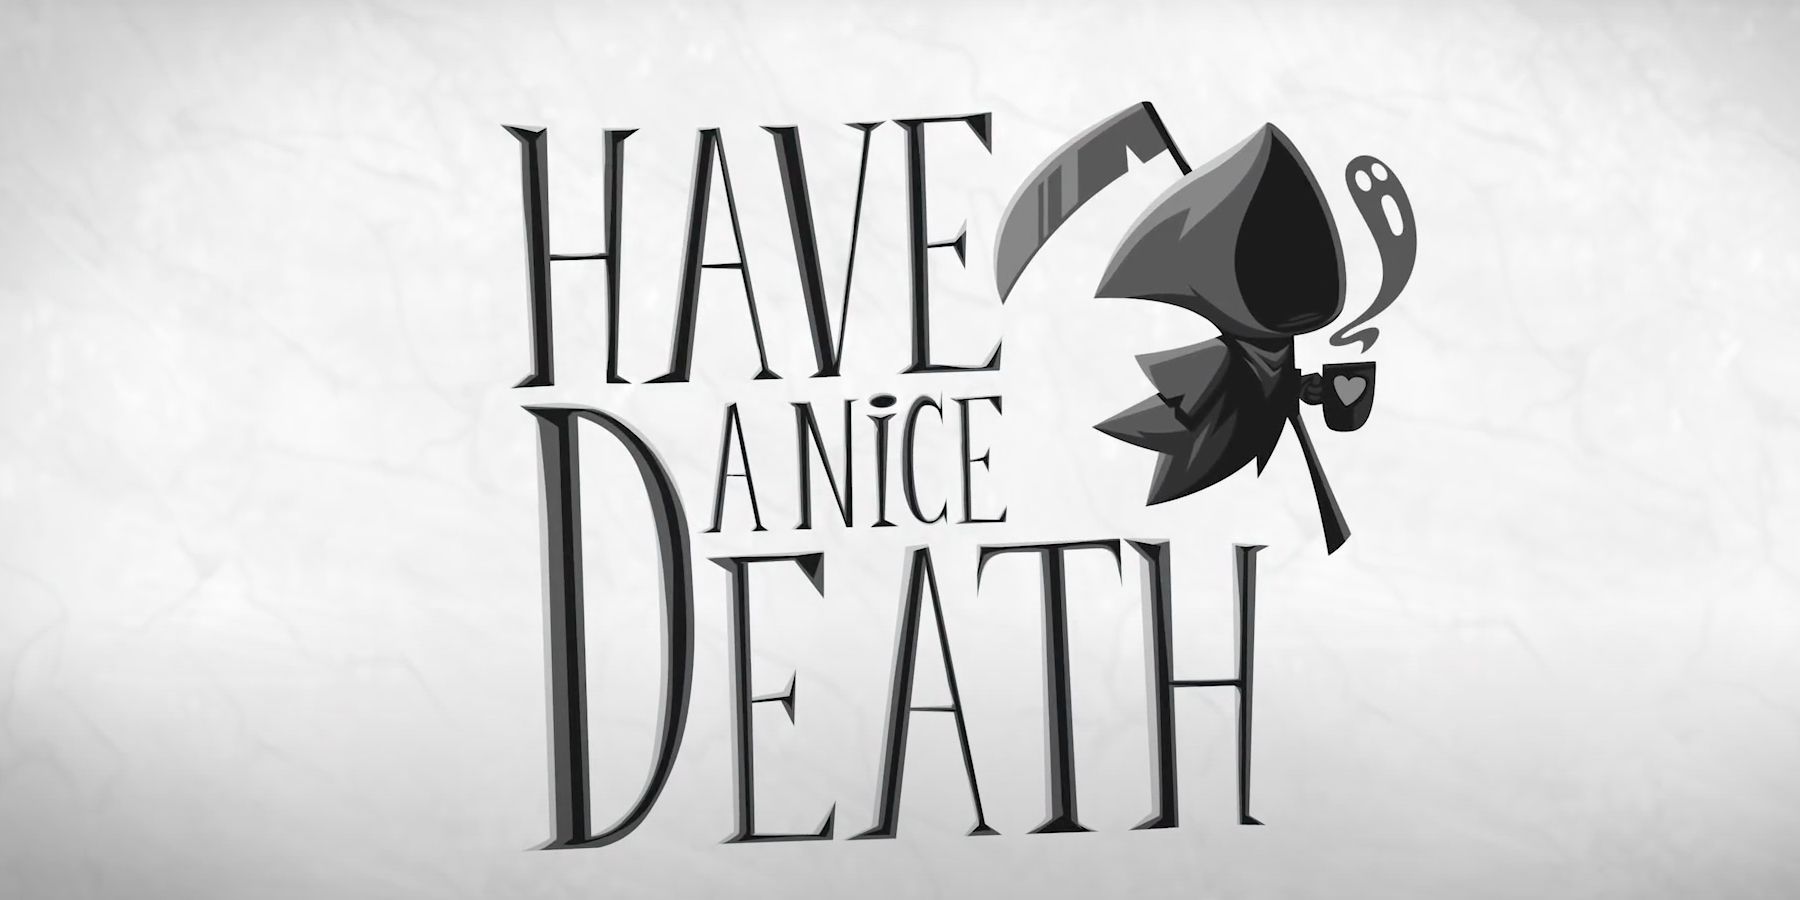 Nice have death a Have A